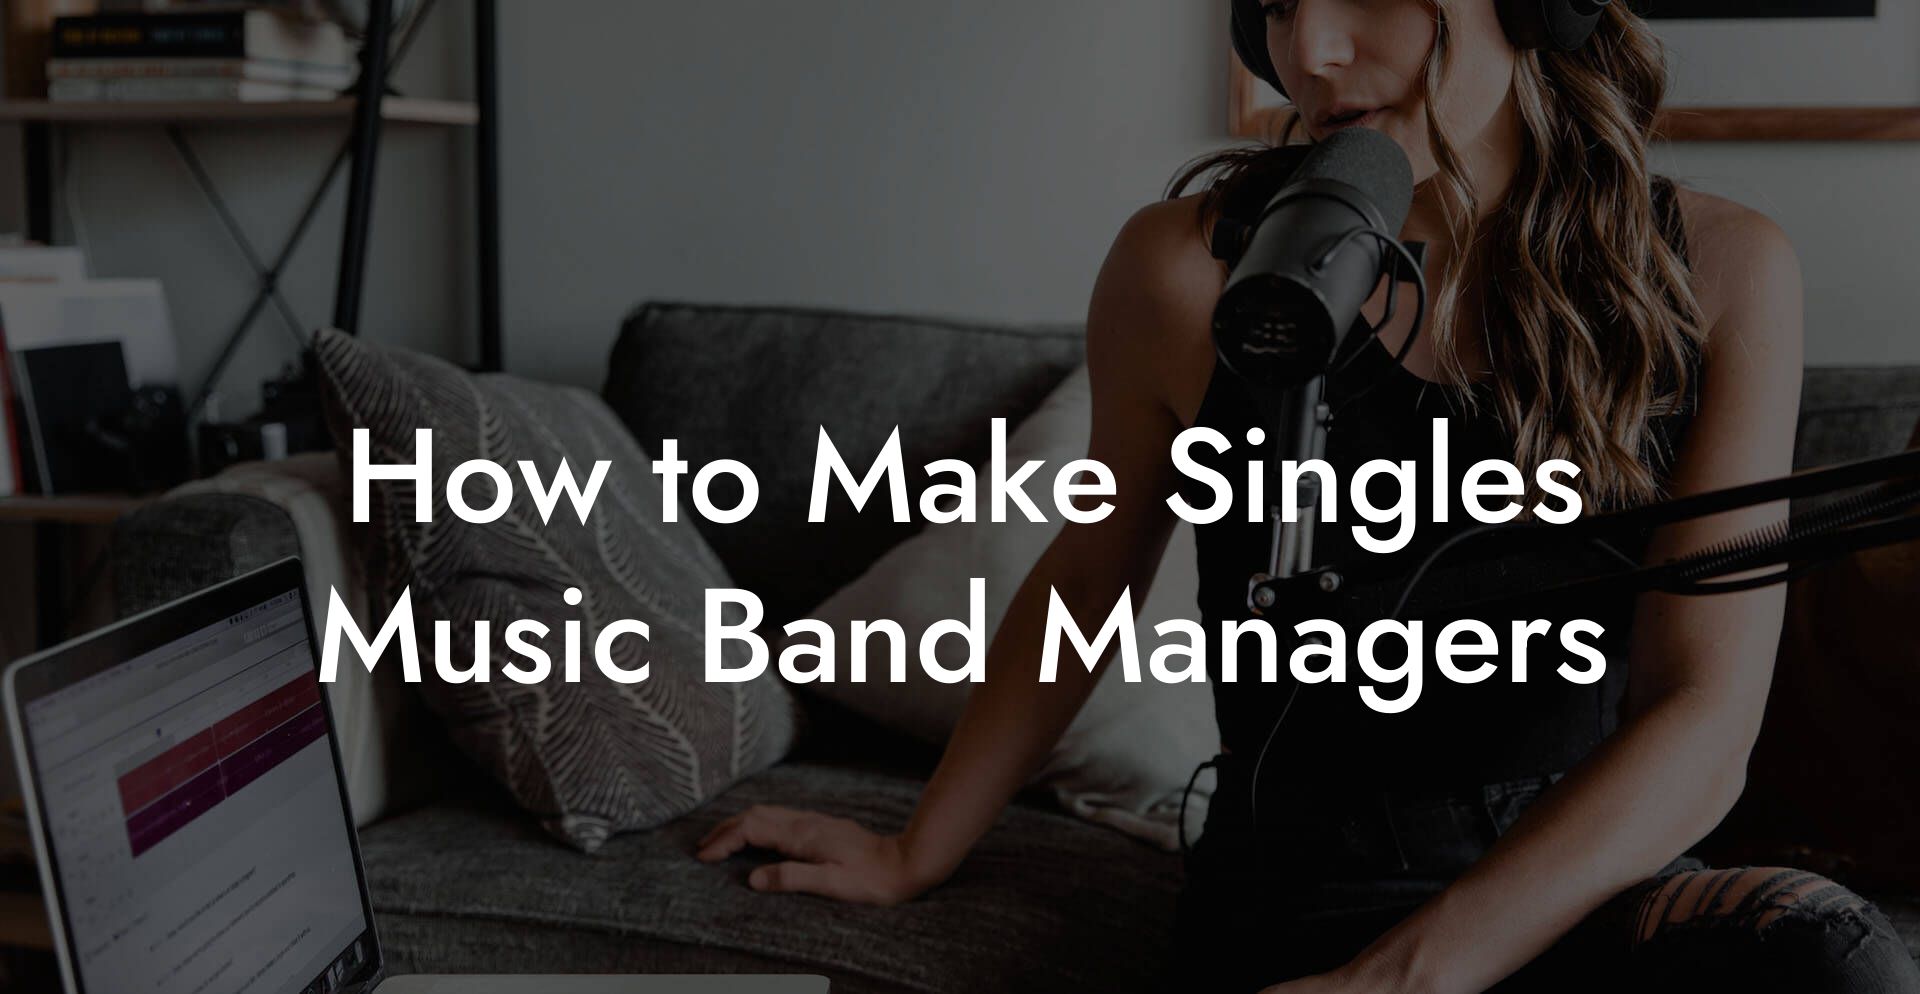 How to Make Singles Music Band Managers